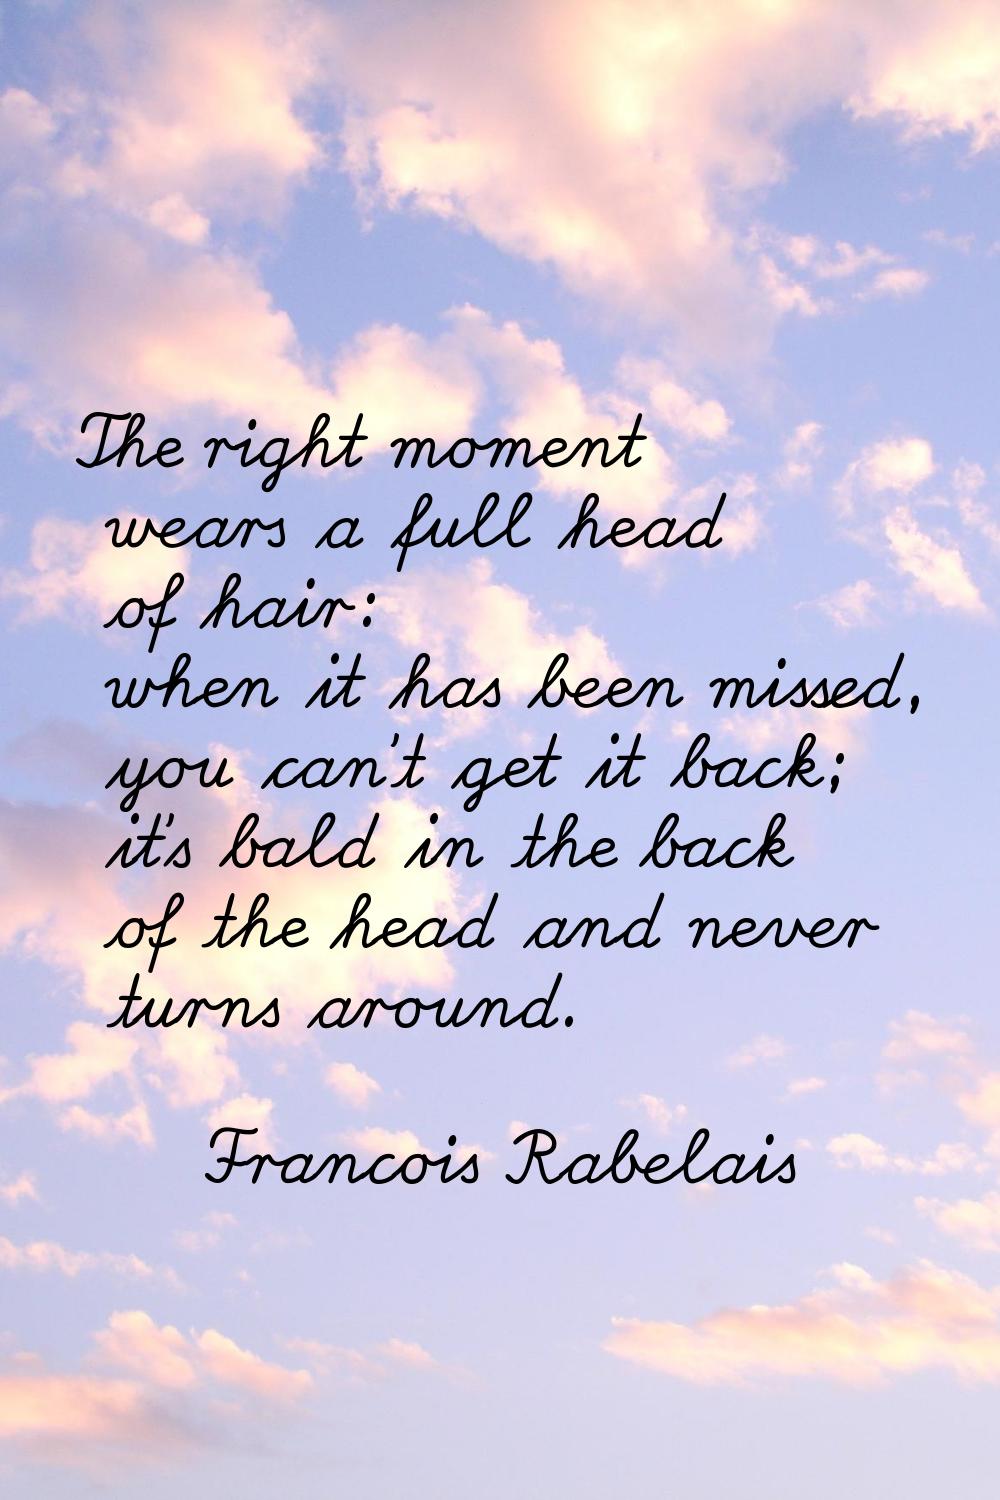 The right moment wears a full head of hair: when it has been missed, you can't get it back; it's ba